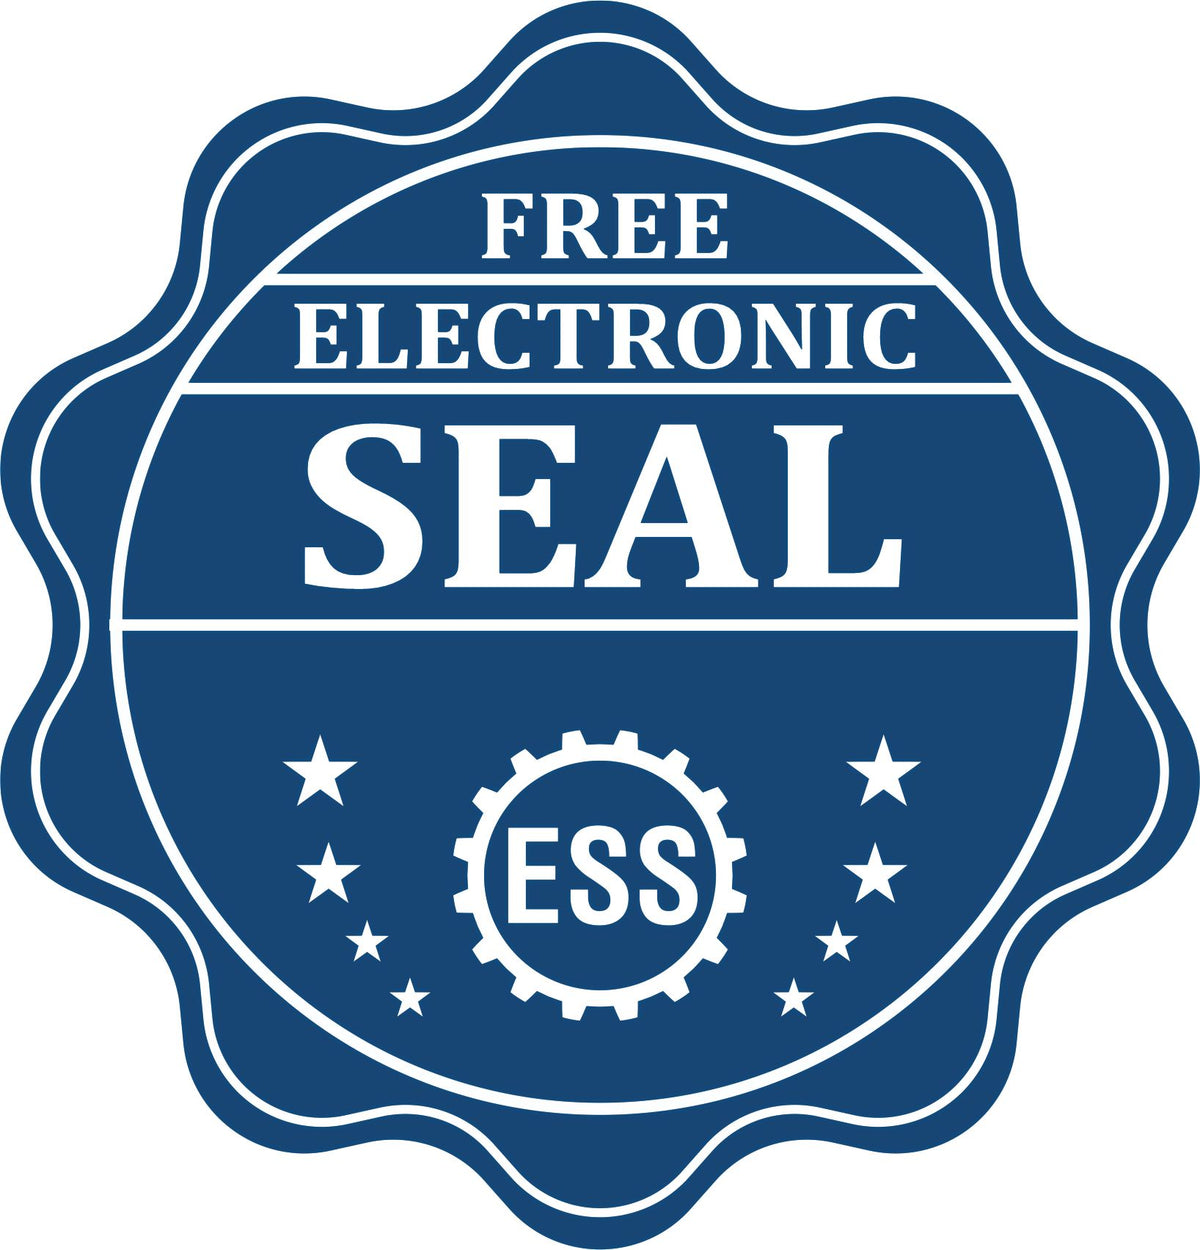 A badge showing a free electronic seal for the Gift Oklahoma Landscape Architect Seal with stars and the ESS gear on the emblem.